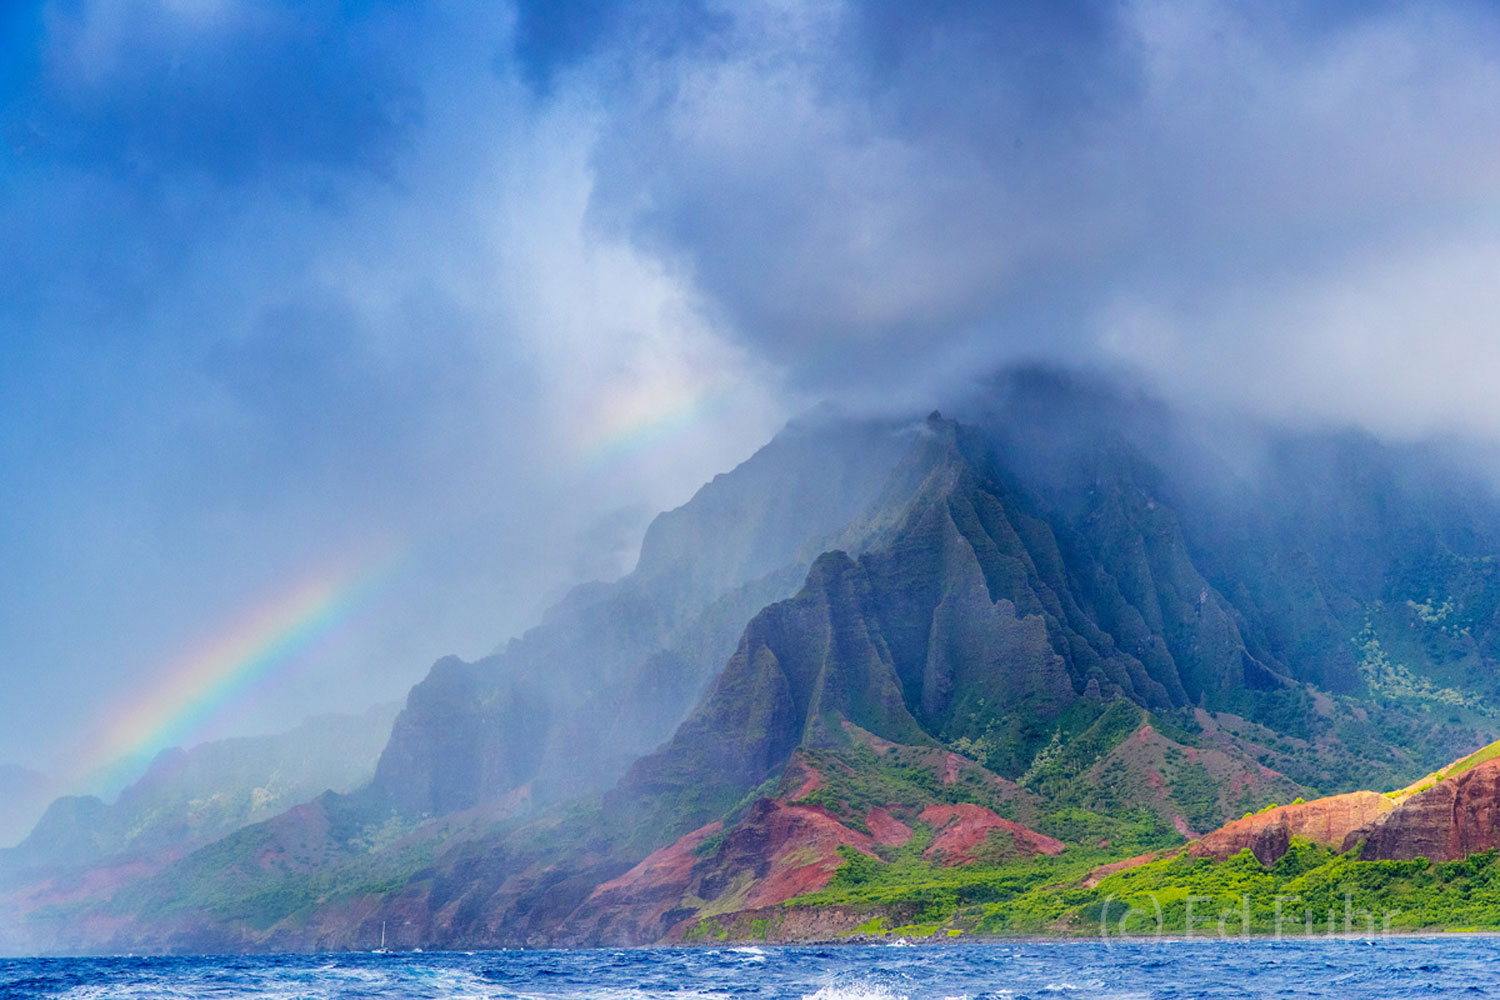 A storm moves over the Na Pali coastline with a rainbow reminder of eternal promises.